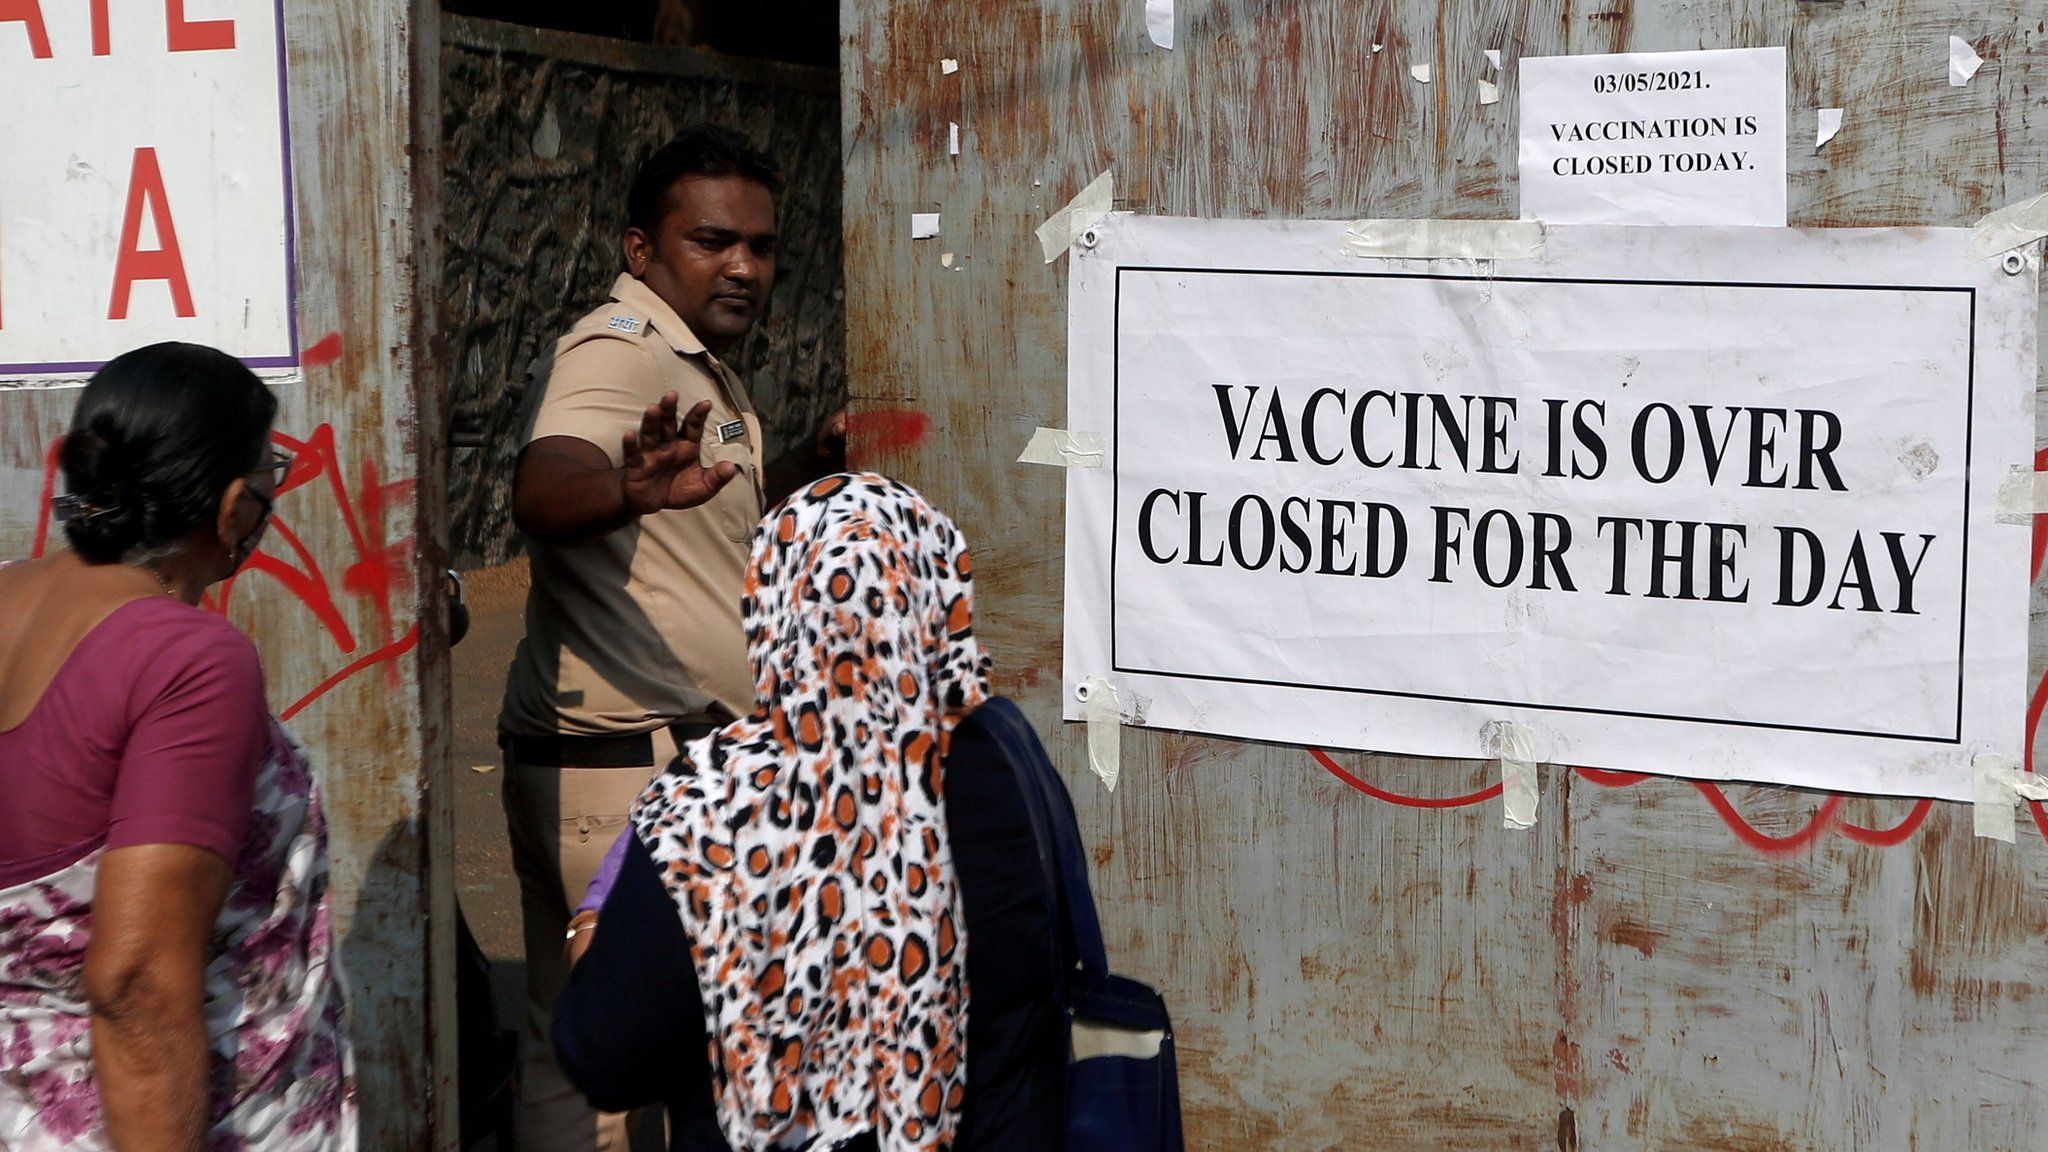 A vaccine centre is closed in Mumbai, India on 3 May